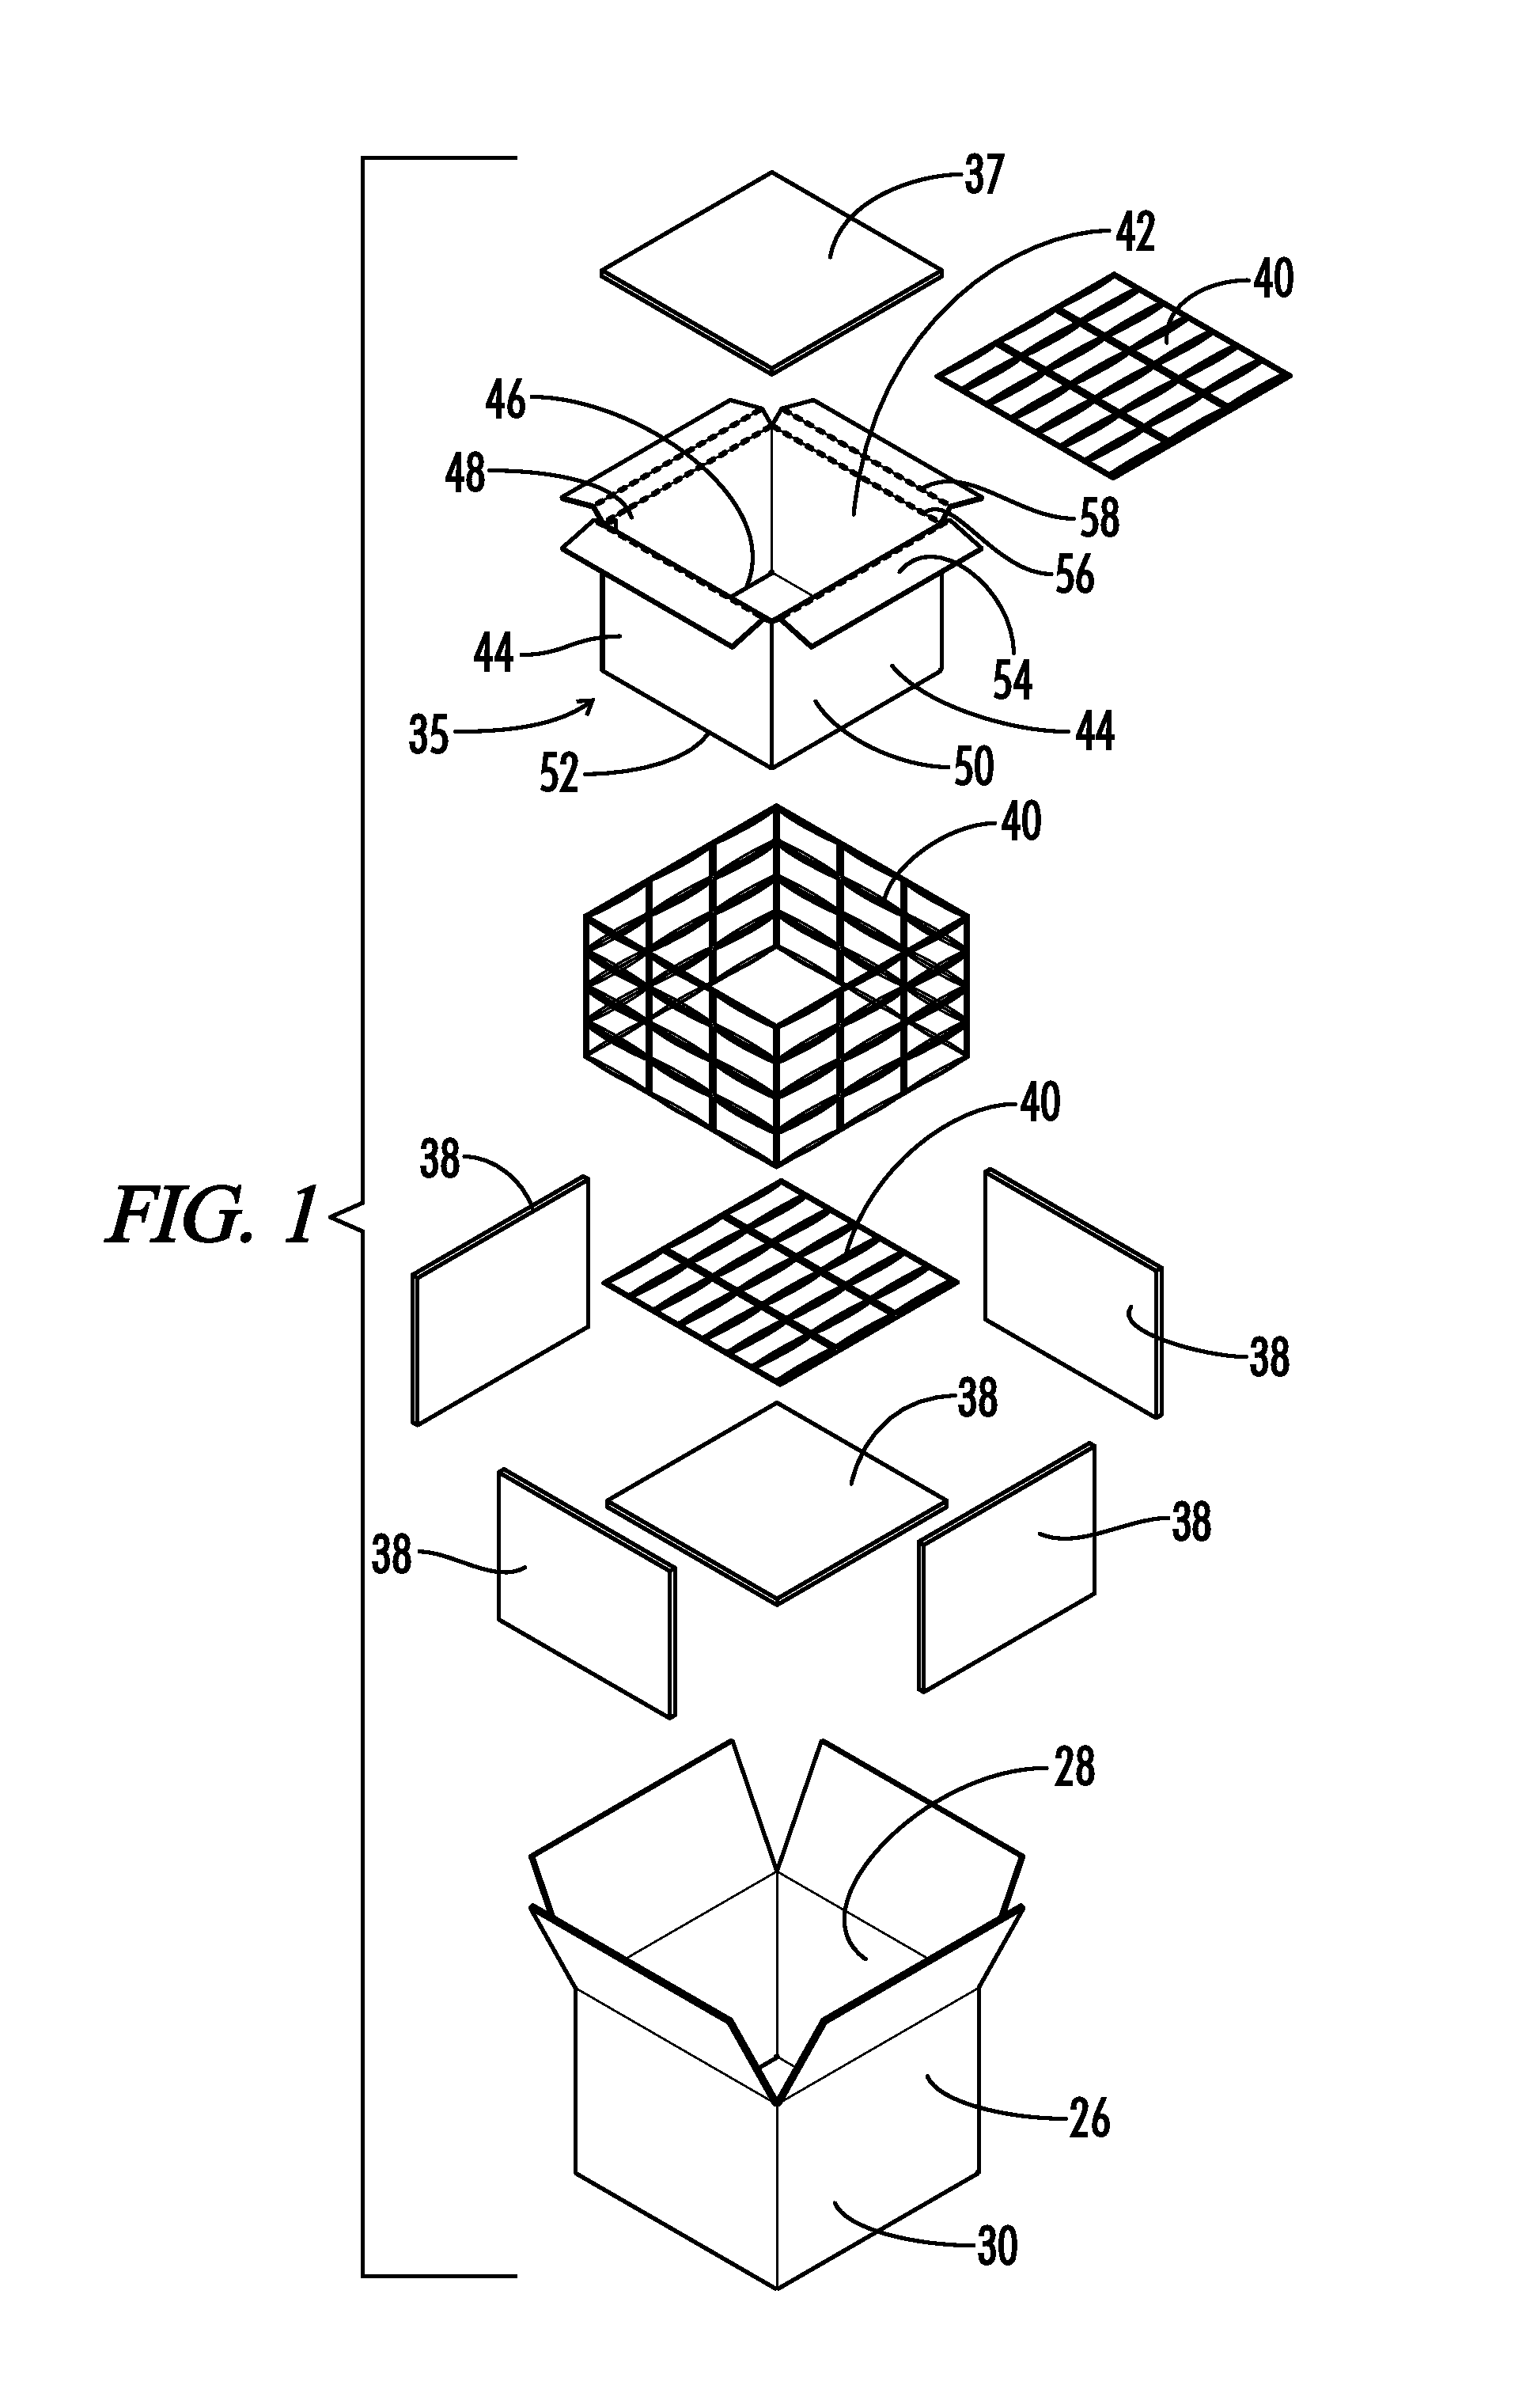 Shipping box system with multiple insulation layers